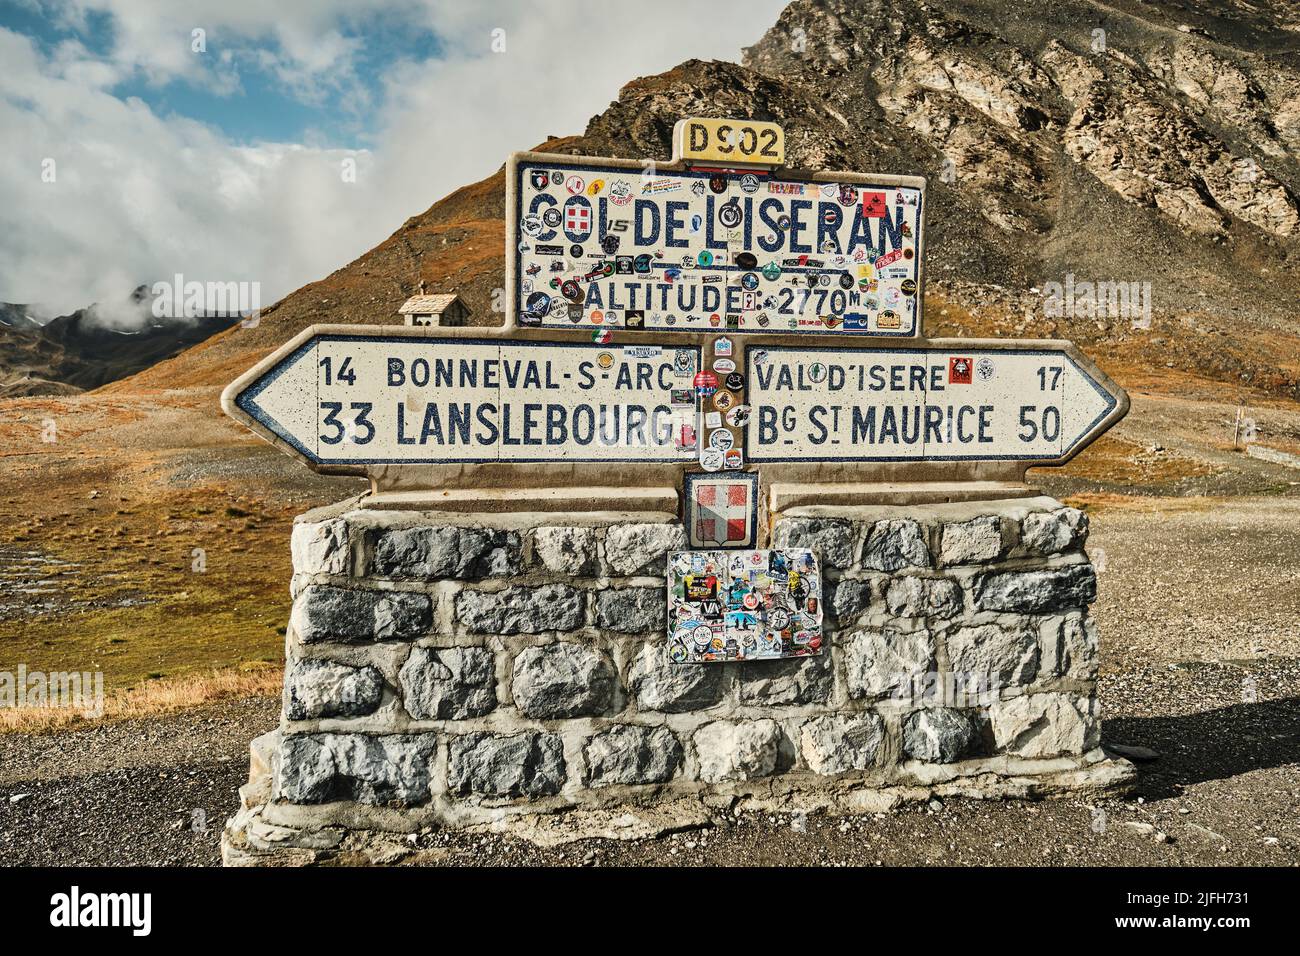 Road sign of Col de Liseran stage on the tour de france in the french alps Stock Photo